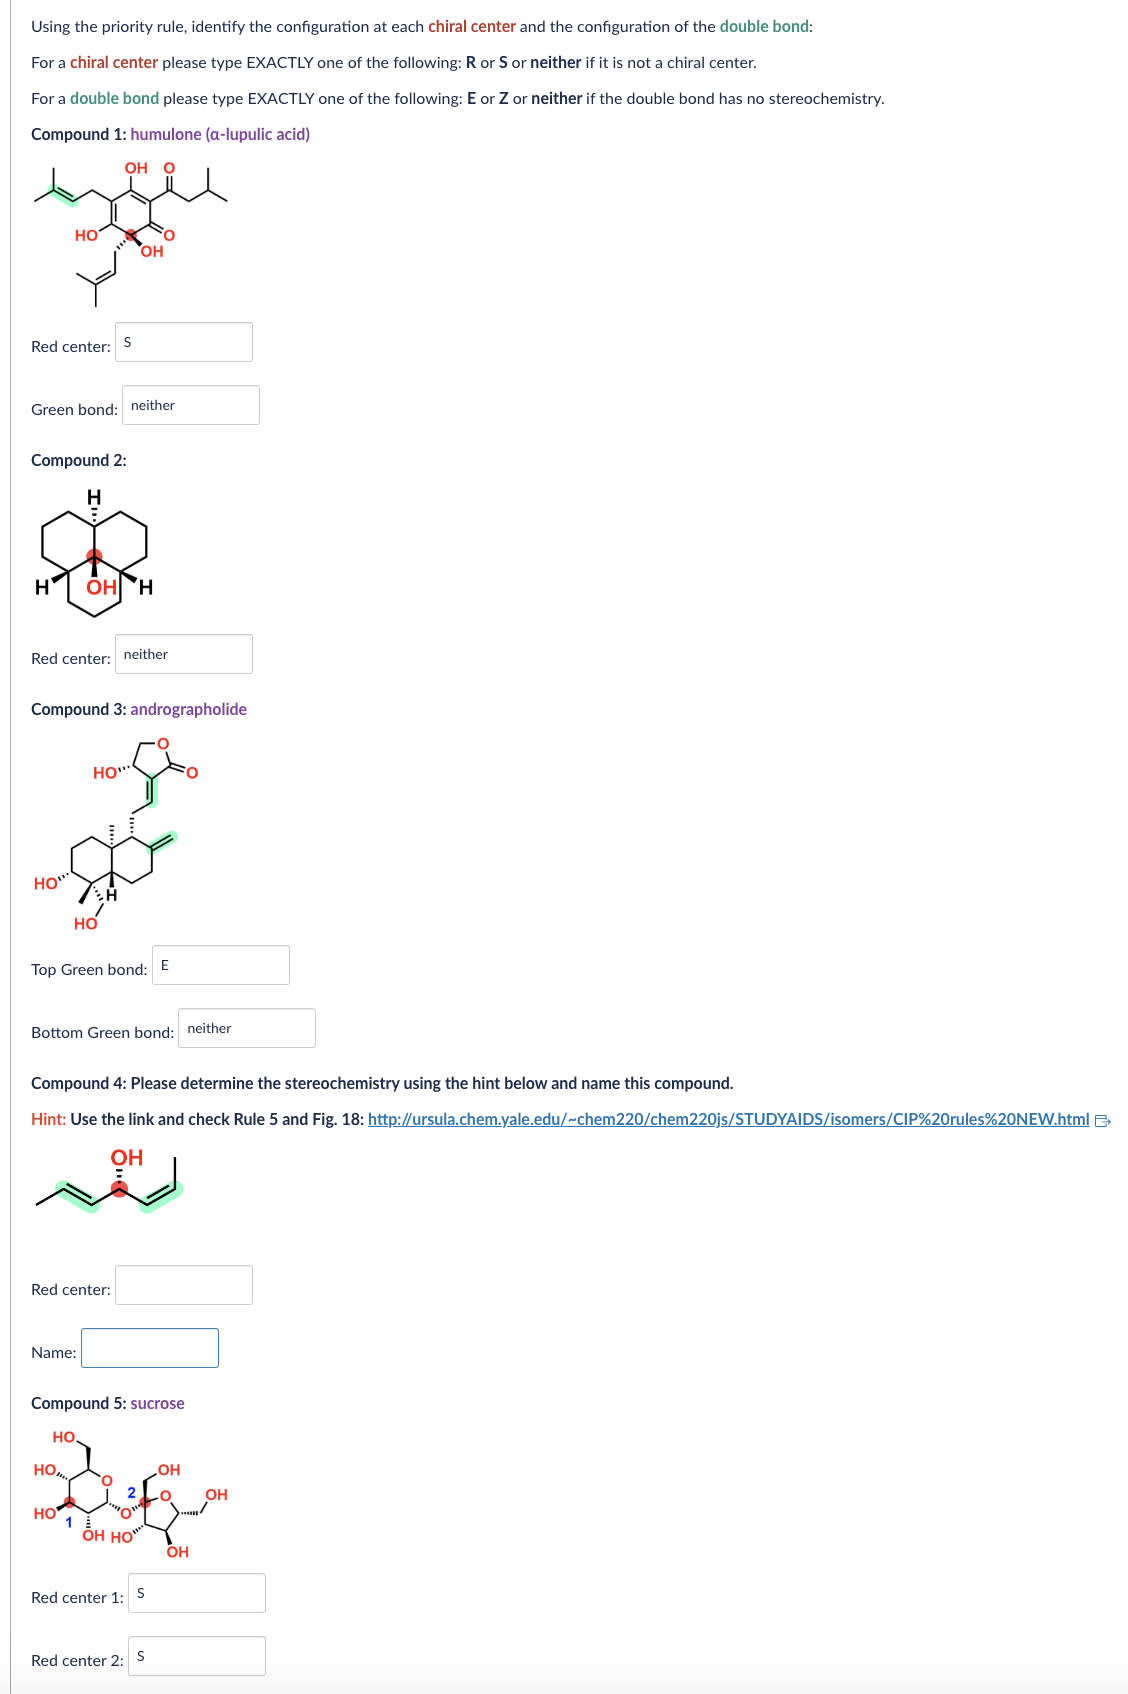 Using the priority rule, identify the configuration at each chiral center and the configuration of the double bond:
For a chiral center please type EXACTLY one of the following: R or S or neither if it is not a chiral center.
For a double bond please type EXACTLY one of the following: E or Z or neither if the double bond has no stereochemistry.
Compound 1: humulone (a-lupulic acid)
HO
OH °
Red center:
S
OH
Green bond: neither
Compound 2:
H
H
OH H
Red center: neither
Compound 3: andrographolide
HO"
HO"
HO
Top Green bond: E
Bottom Green bond: neither
Compound 4: Please determine the stereochemistry using the hint below and name this compound.
Hint: Use the link and check Rule 5 and Fig. 18: http://ursula.chem.yale.edu/~chem220/chem220js/STUDYAIDS/isomers/CIP%20rules%20NEW.html >>
OH
Red center:
Name:
Compound 5: sucrose
HO
HO
OH
2
OH
HO
1
ŌH HO
OH
Red center 1:
S
Red center 2: S